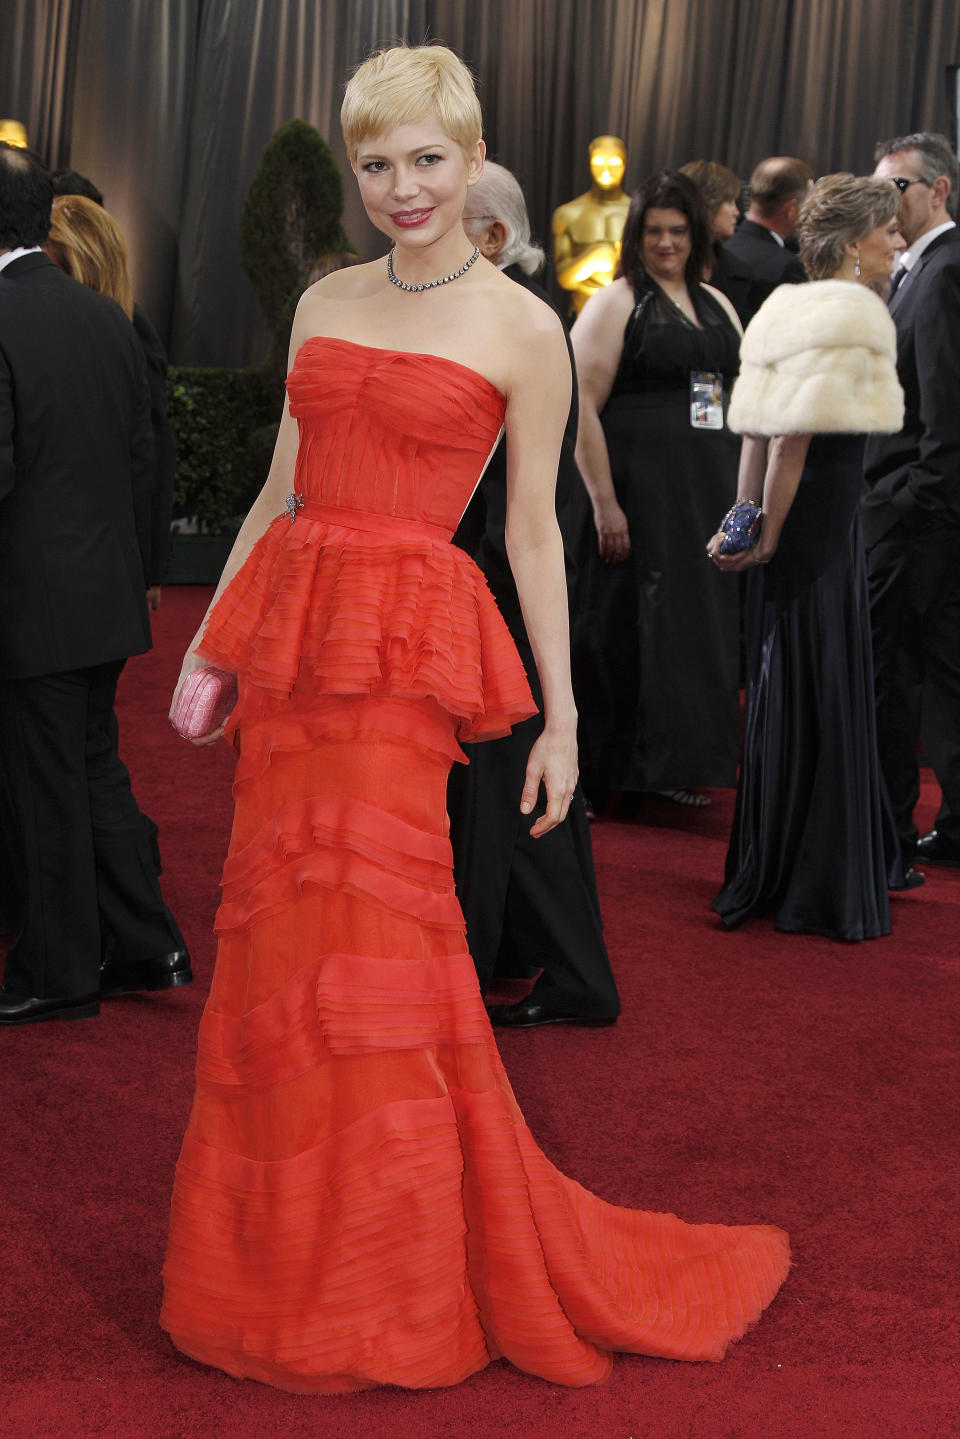 Michelle Williams arrives before the 84th Academy Awards on Sunday, Feb. 26, 2012, in the Hollywood section of Los Angeles. (AP Photo/Amy Sancetta)